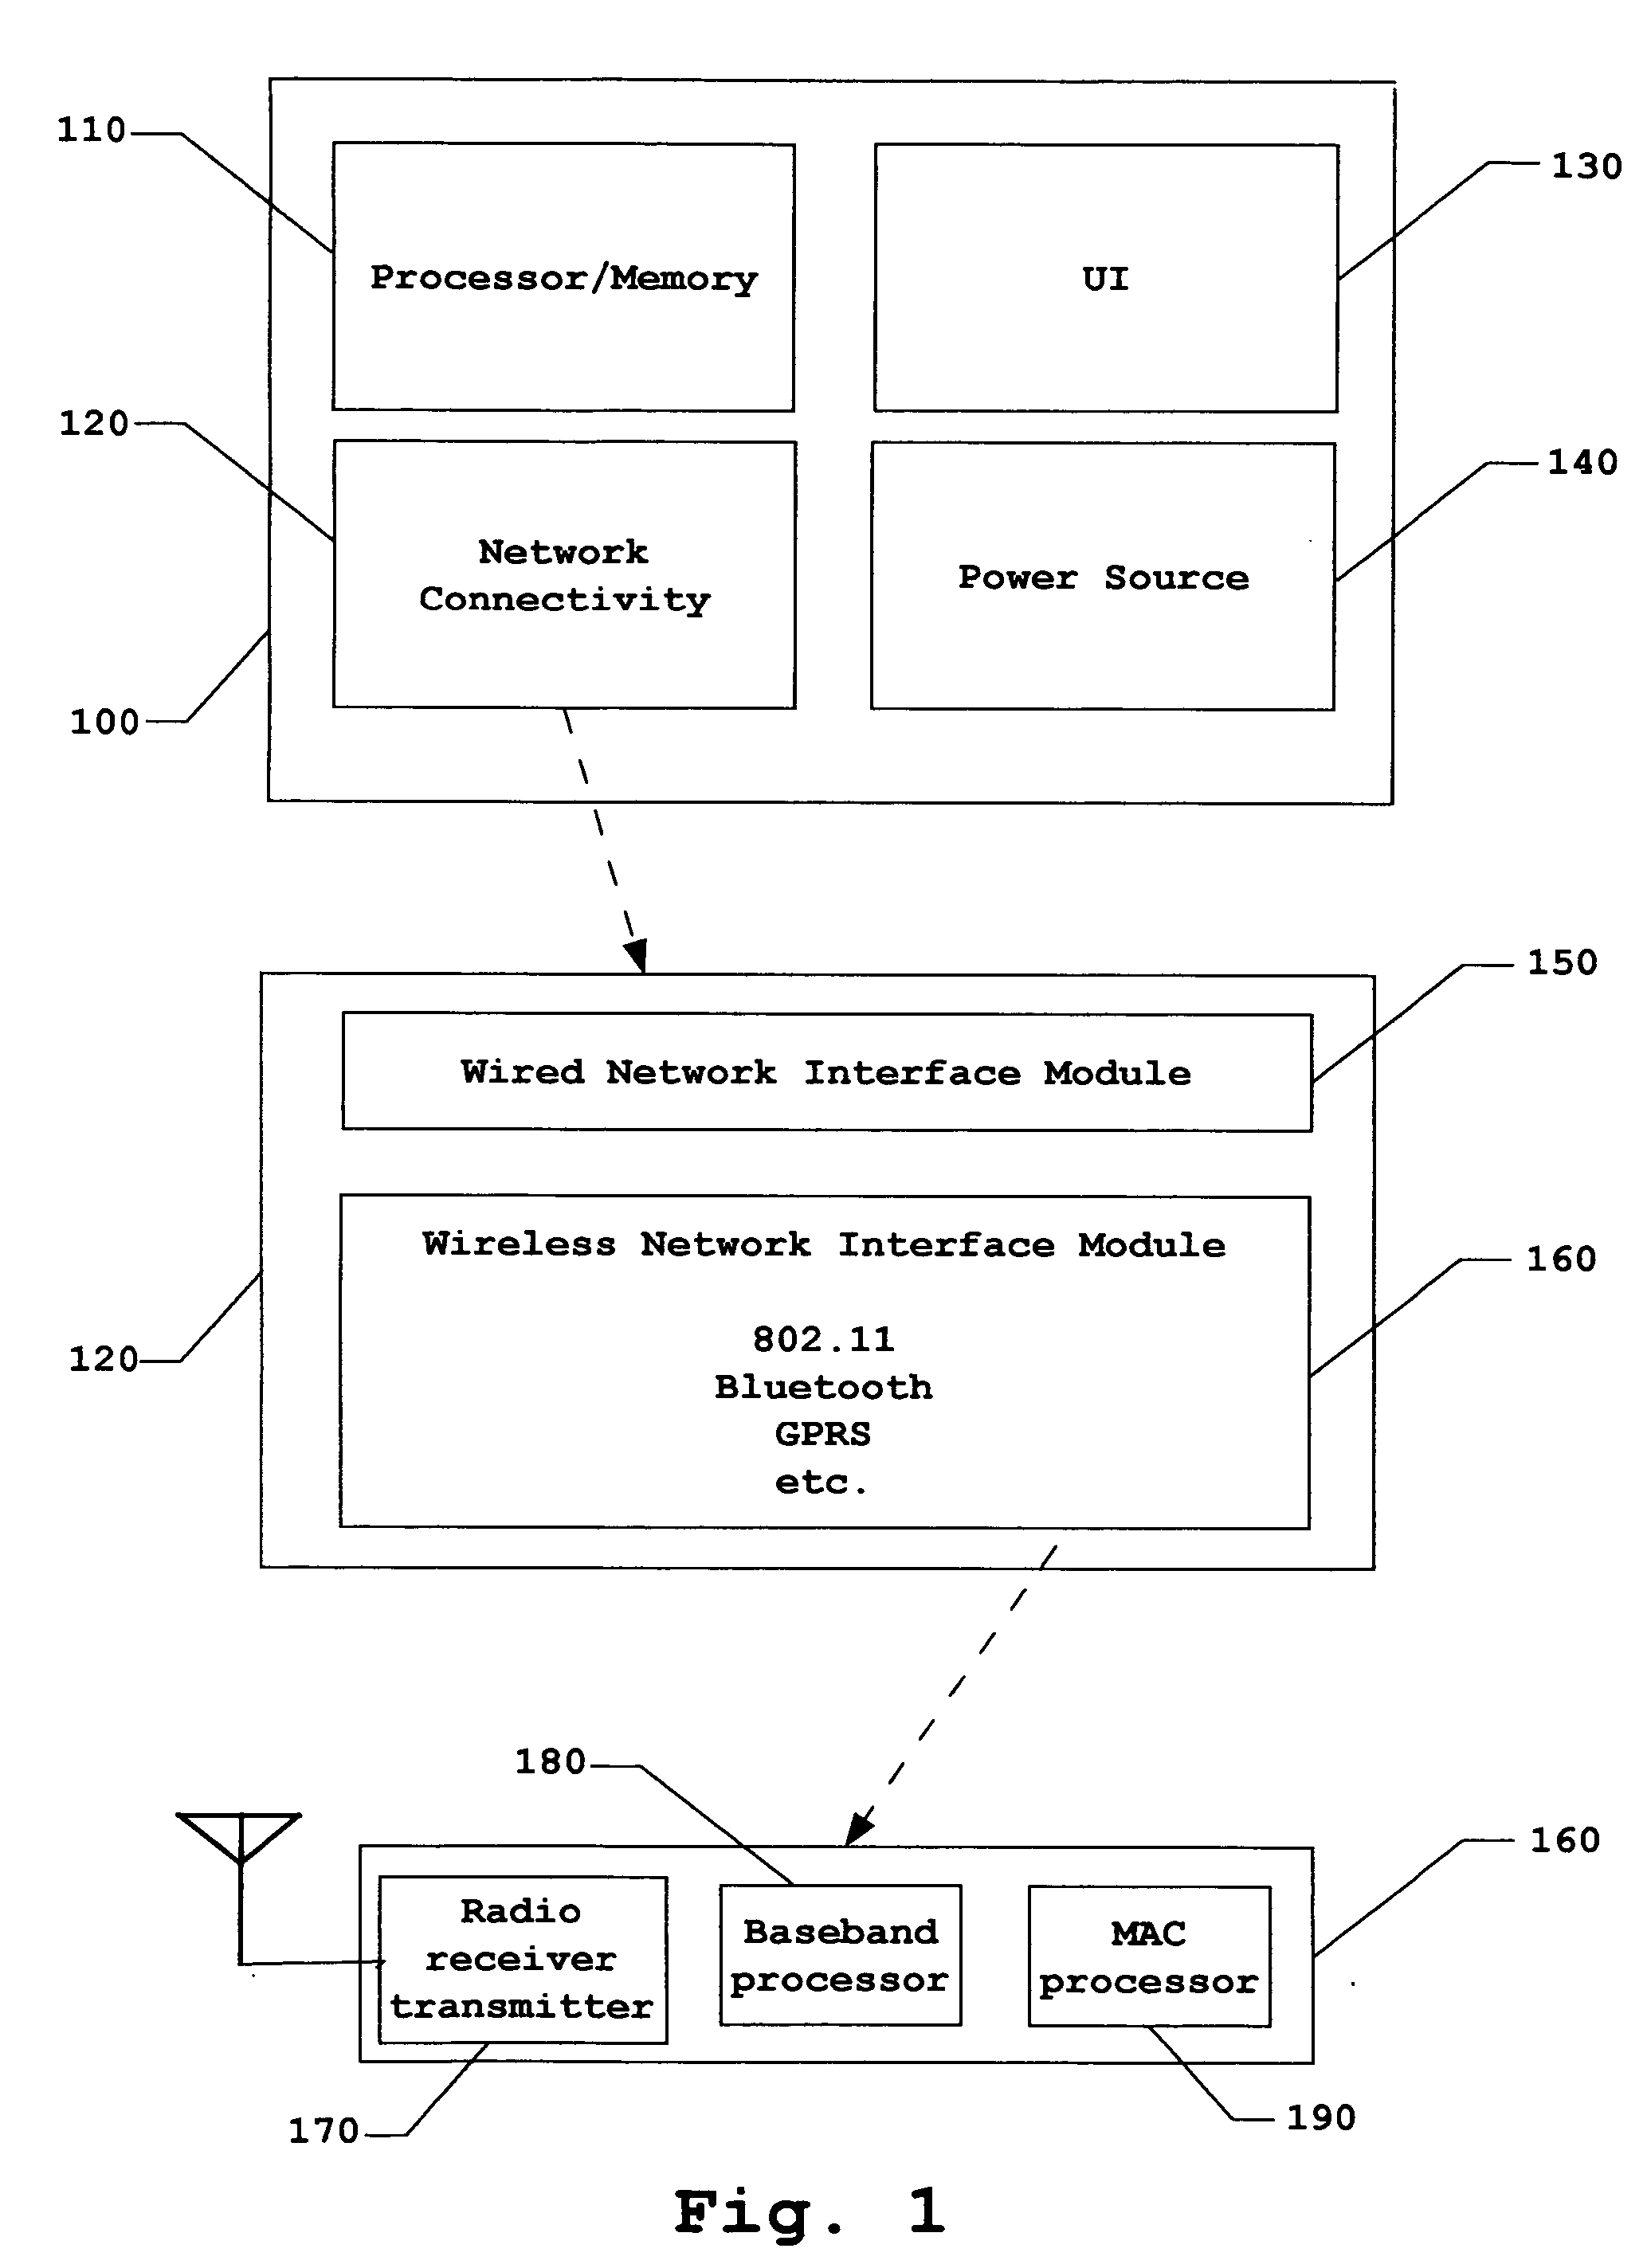 Automatic connection of a mobile device to a wireless network